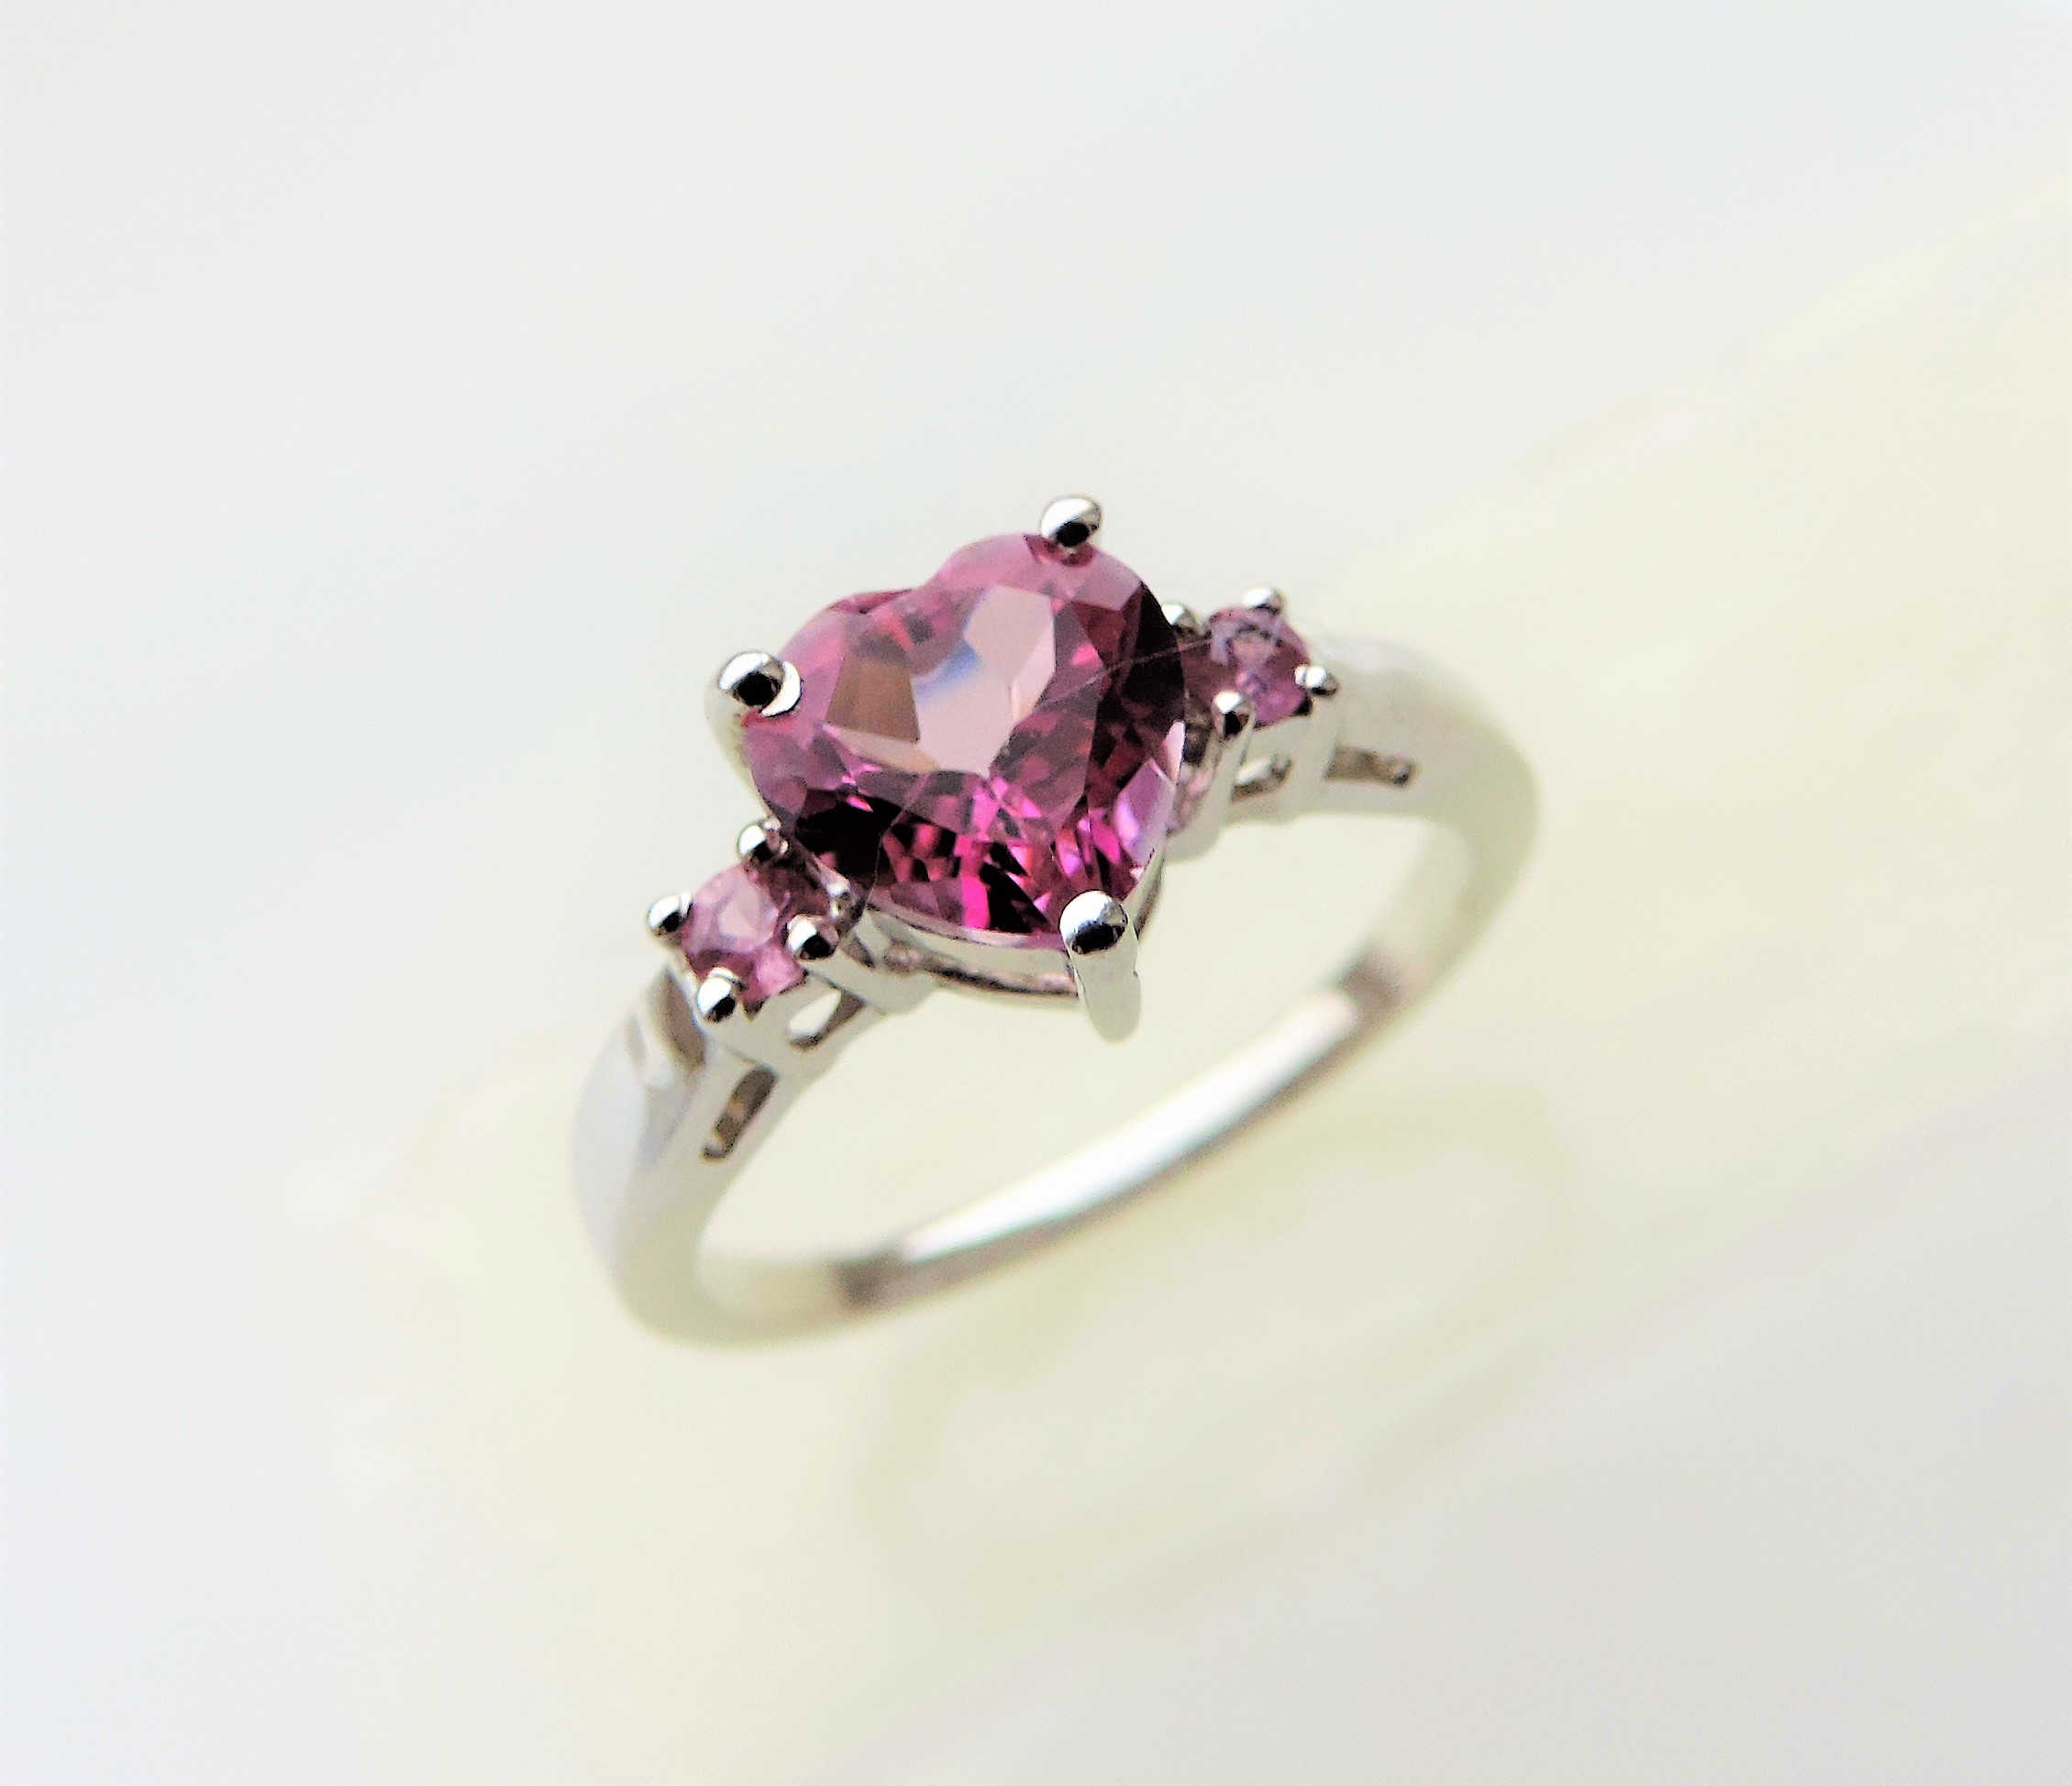 1 carat Solitaire Heart Pink Sapphire Ring - Image 5 of 5